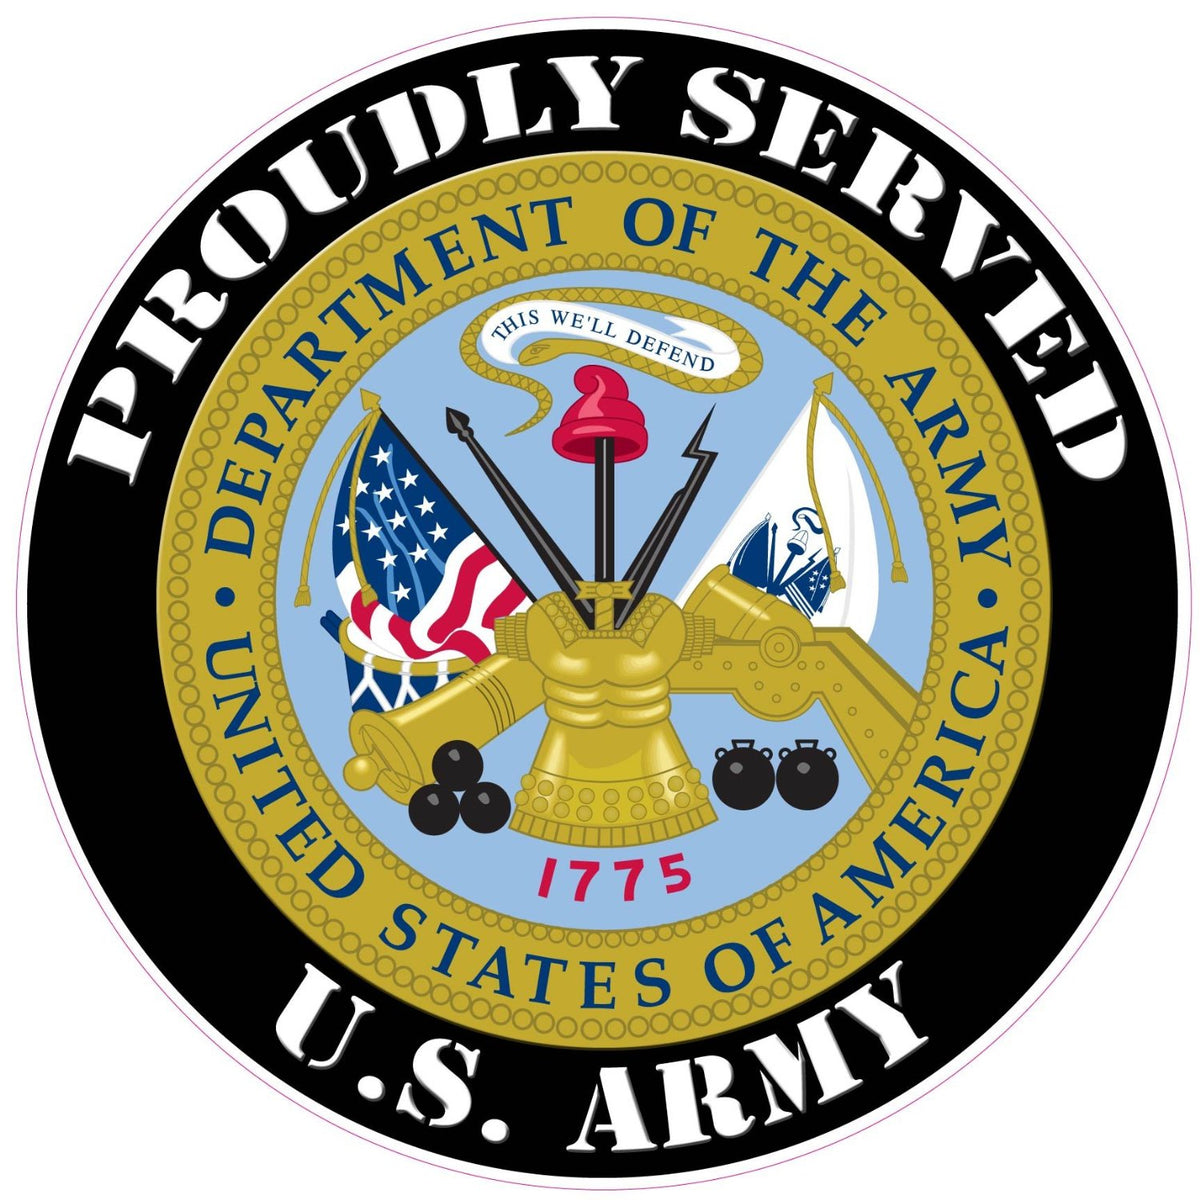 Proudly Served U.S. Army Decal | Nostalgia Decals Military Vinyl ...